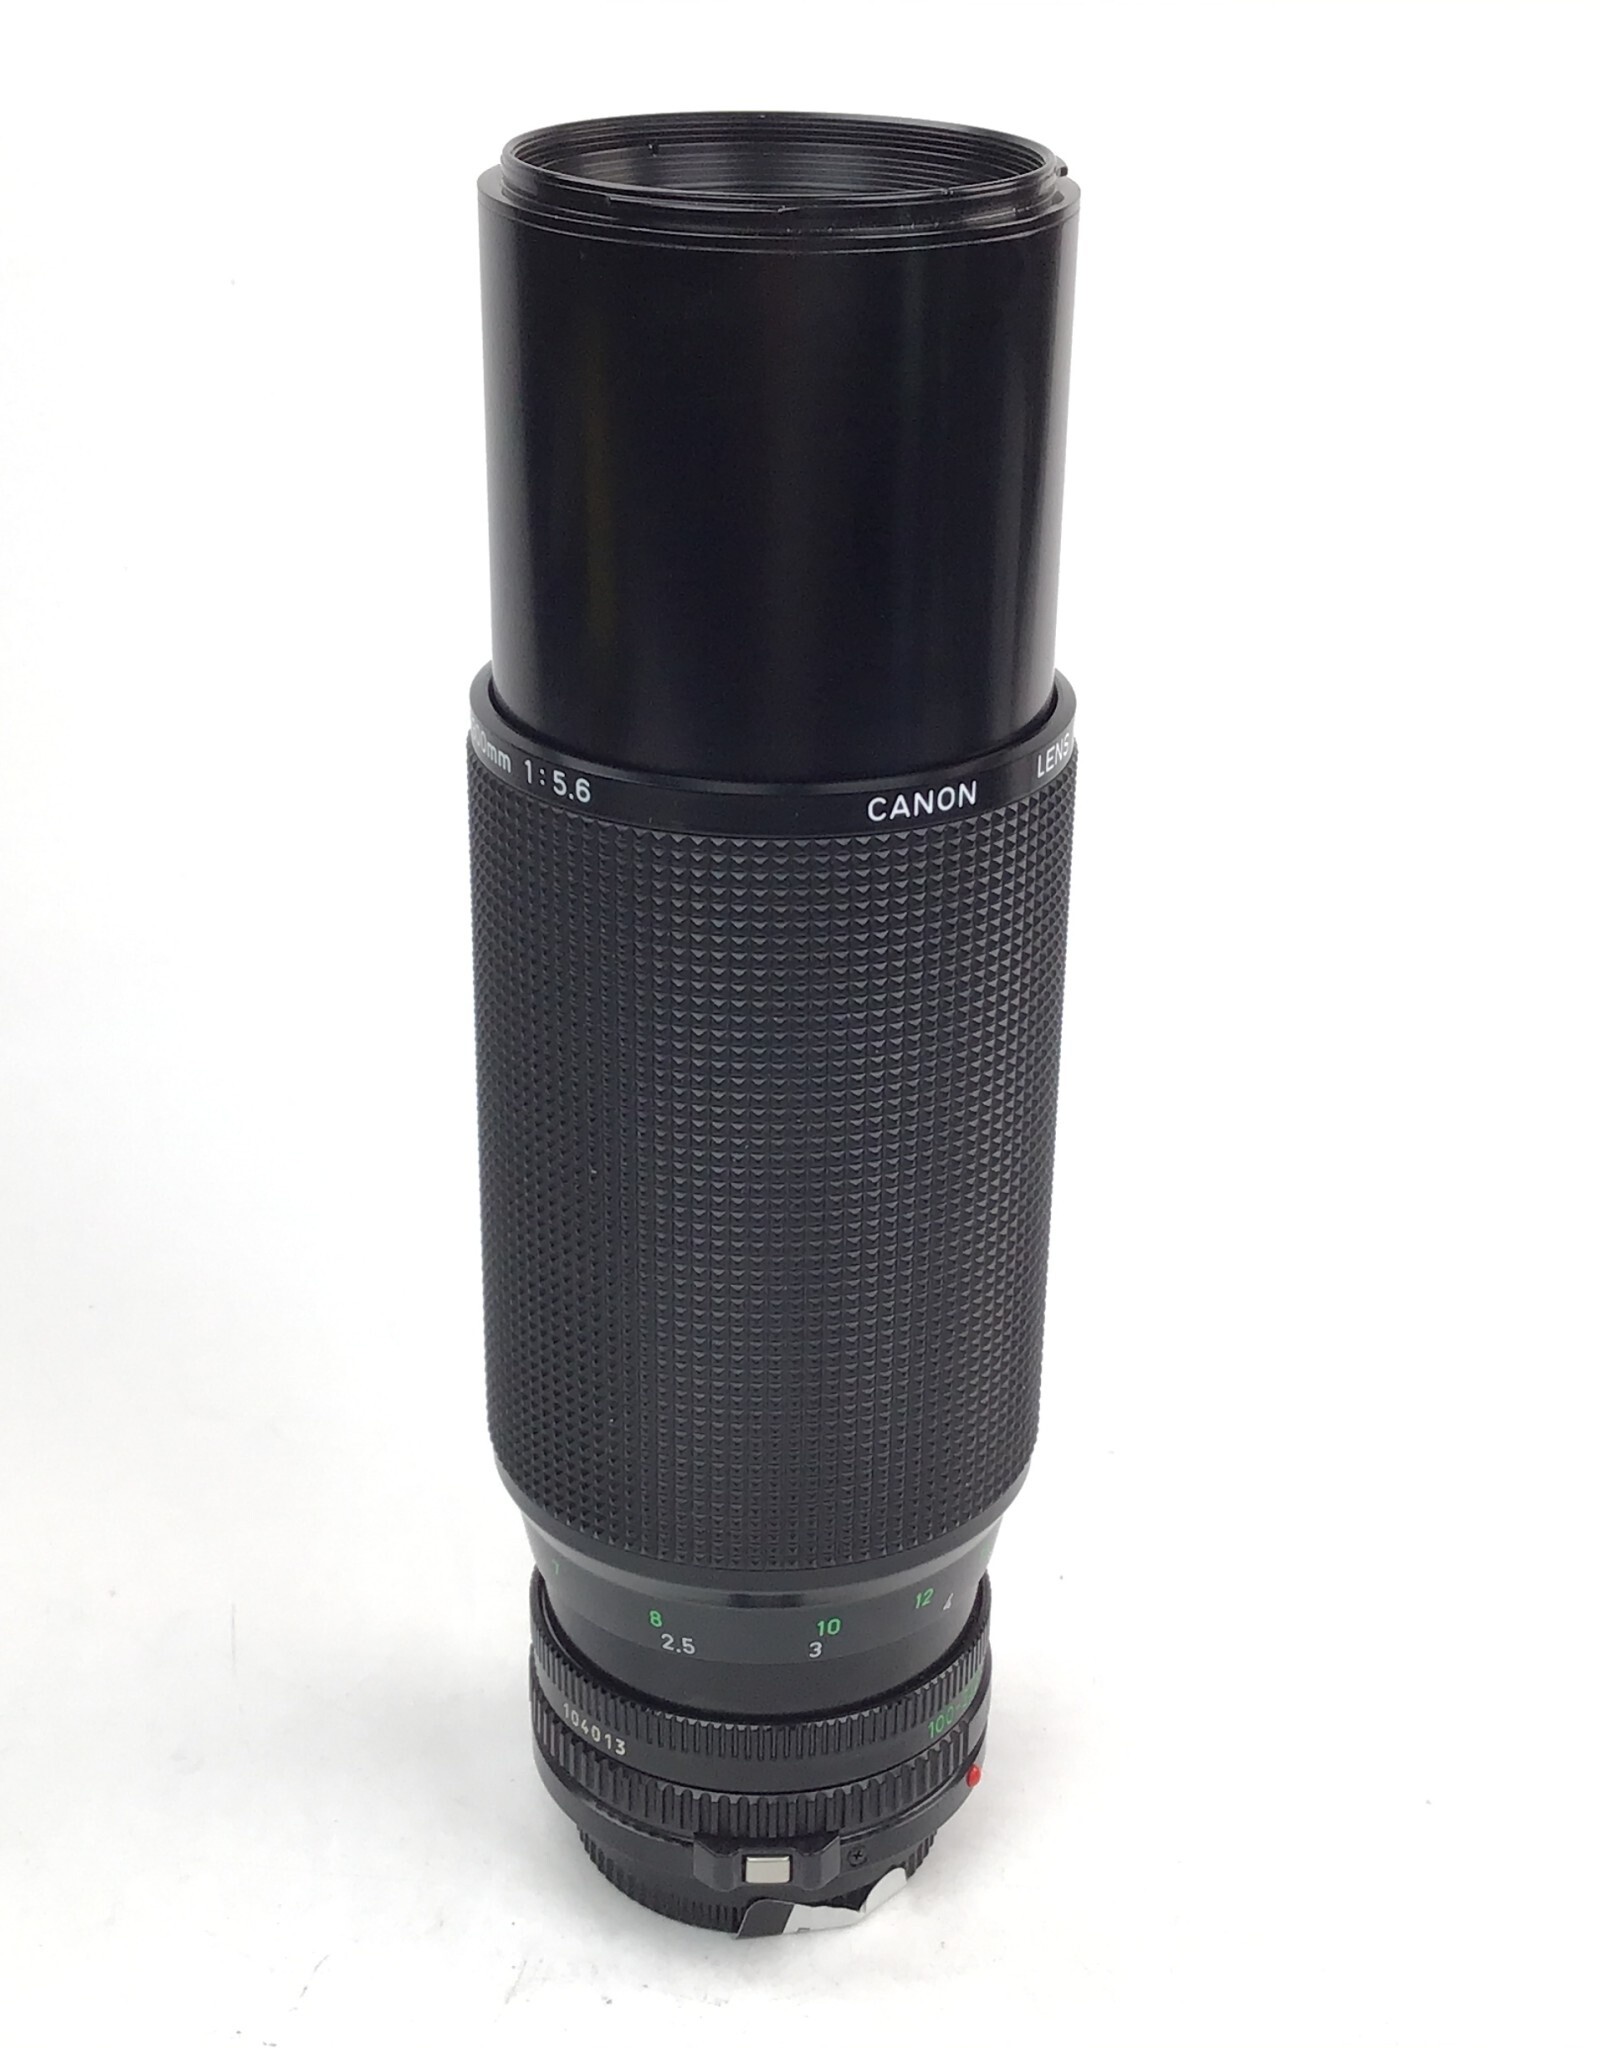 CANON Canon FD 100-300mm f5.6 Lens Used Good